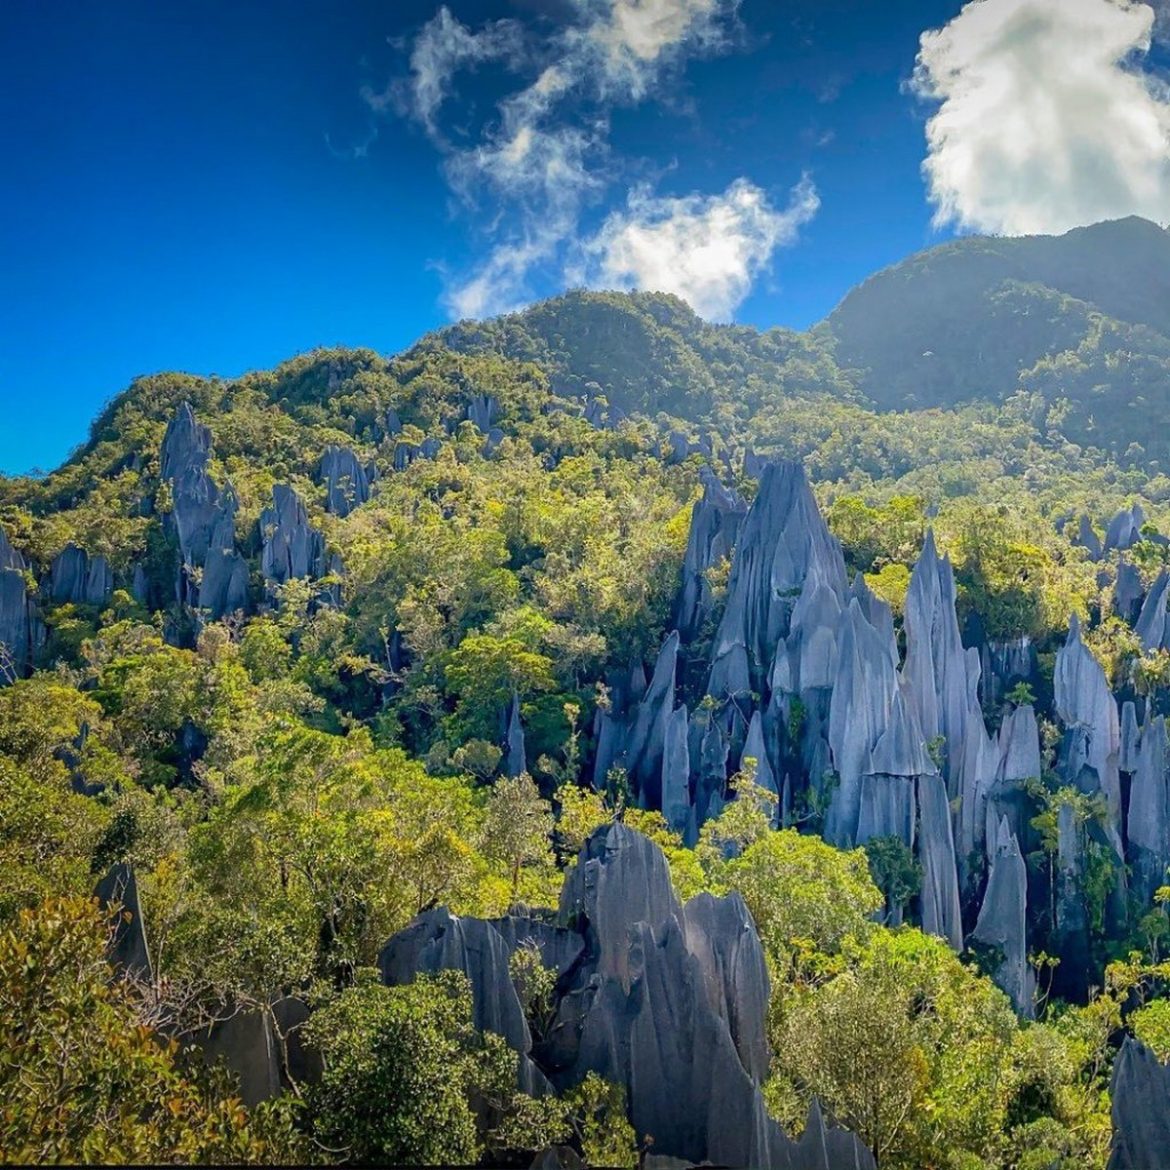 Do You Know Rm100 Background Is Gunung Mulu National Park Which Can Be